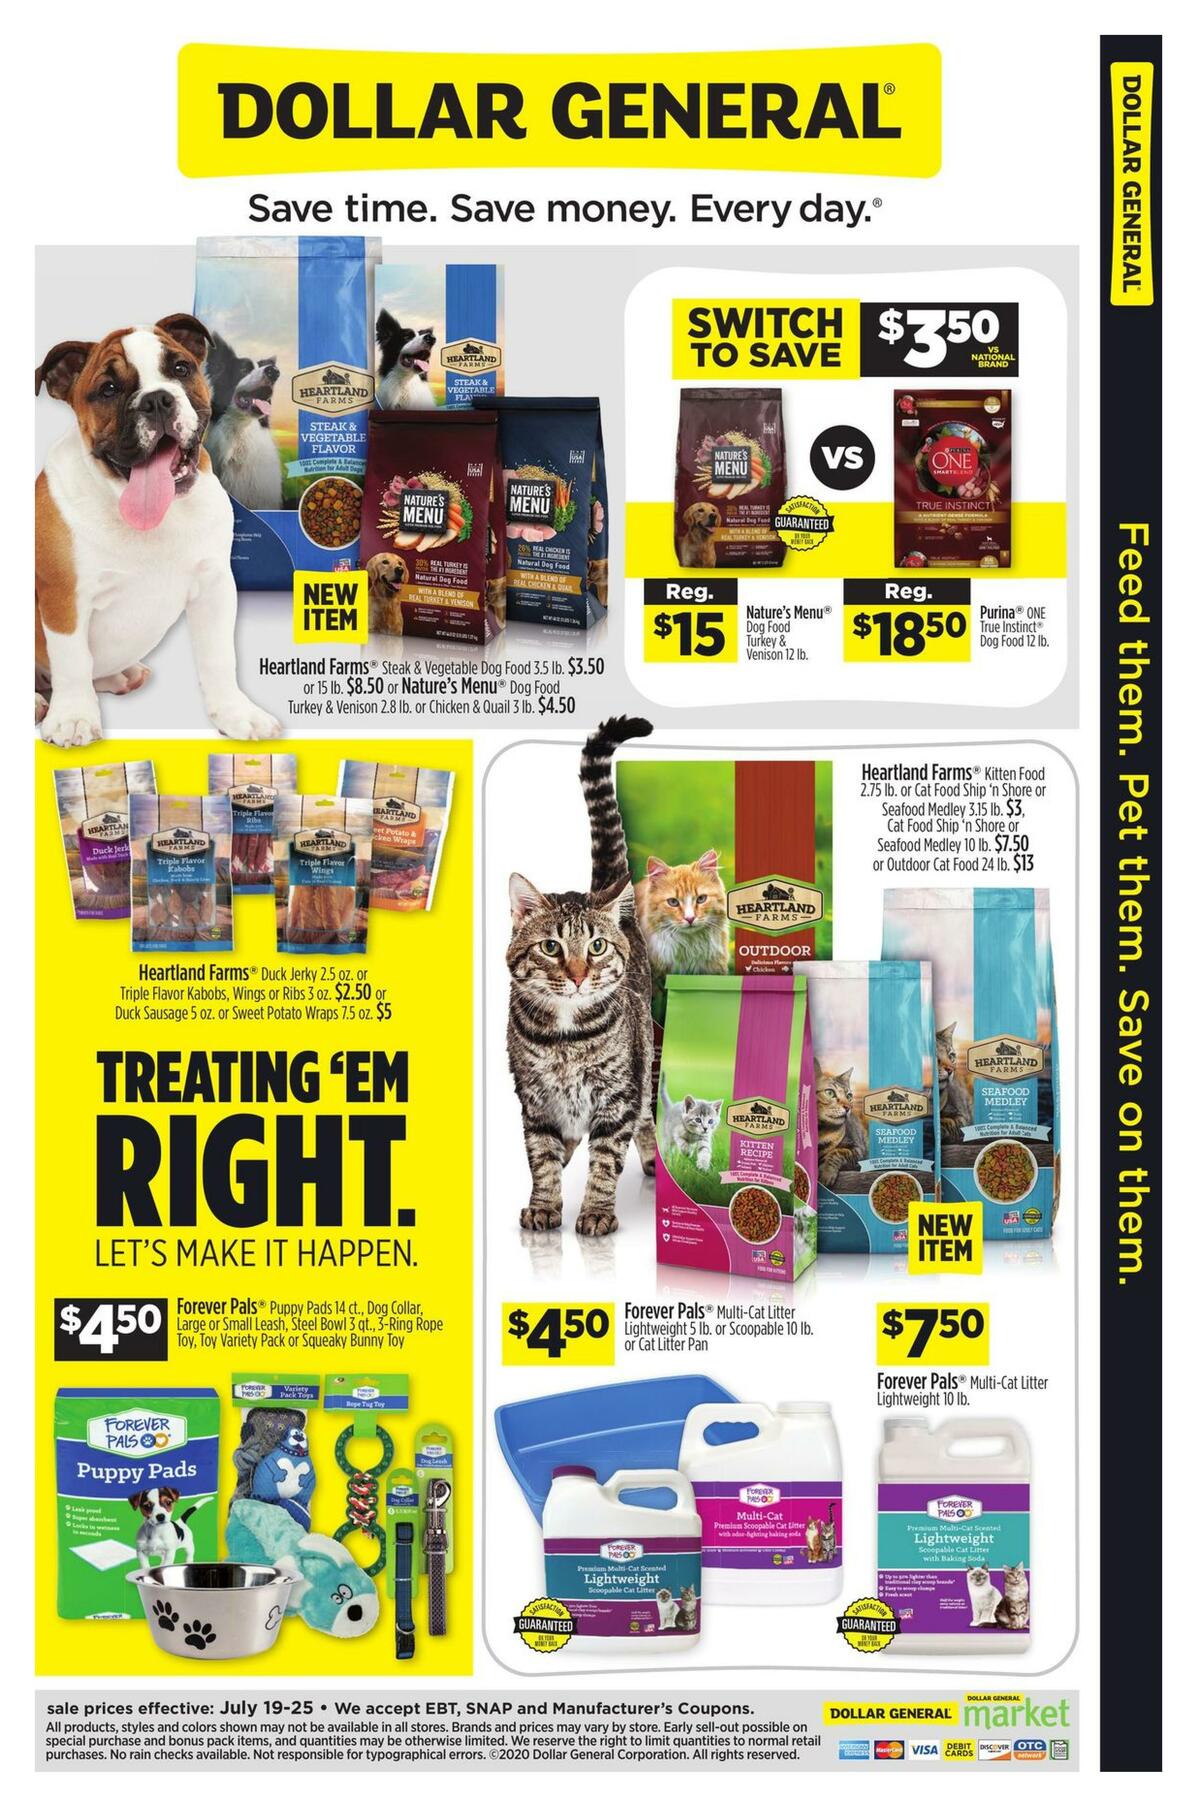 Dollar General Save money on pet supplies Weekly Ad from July 19